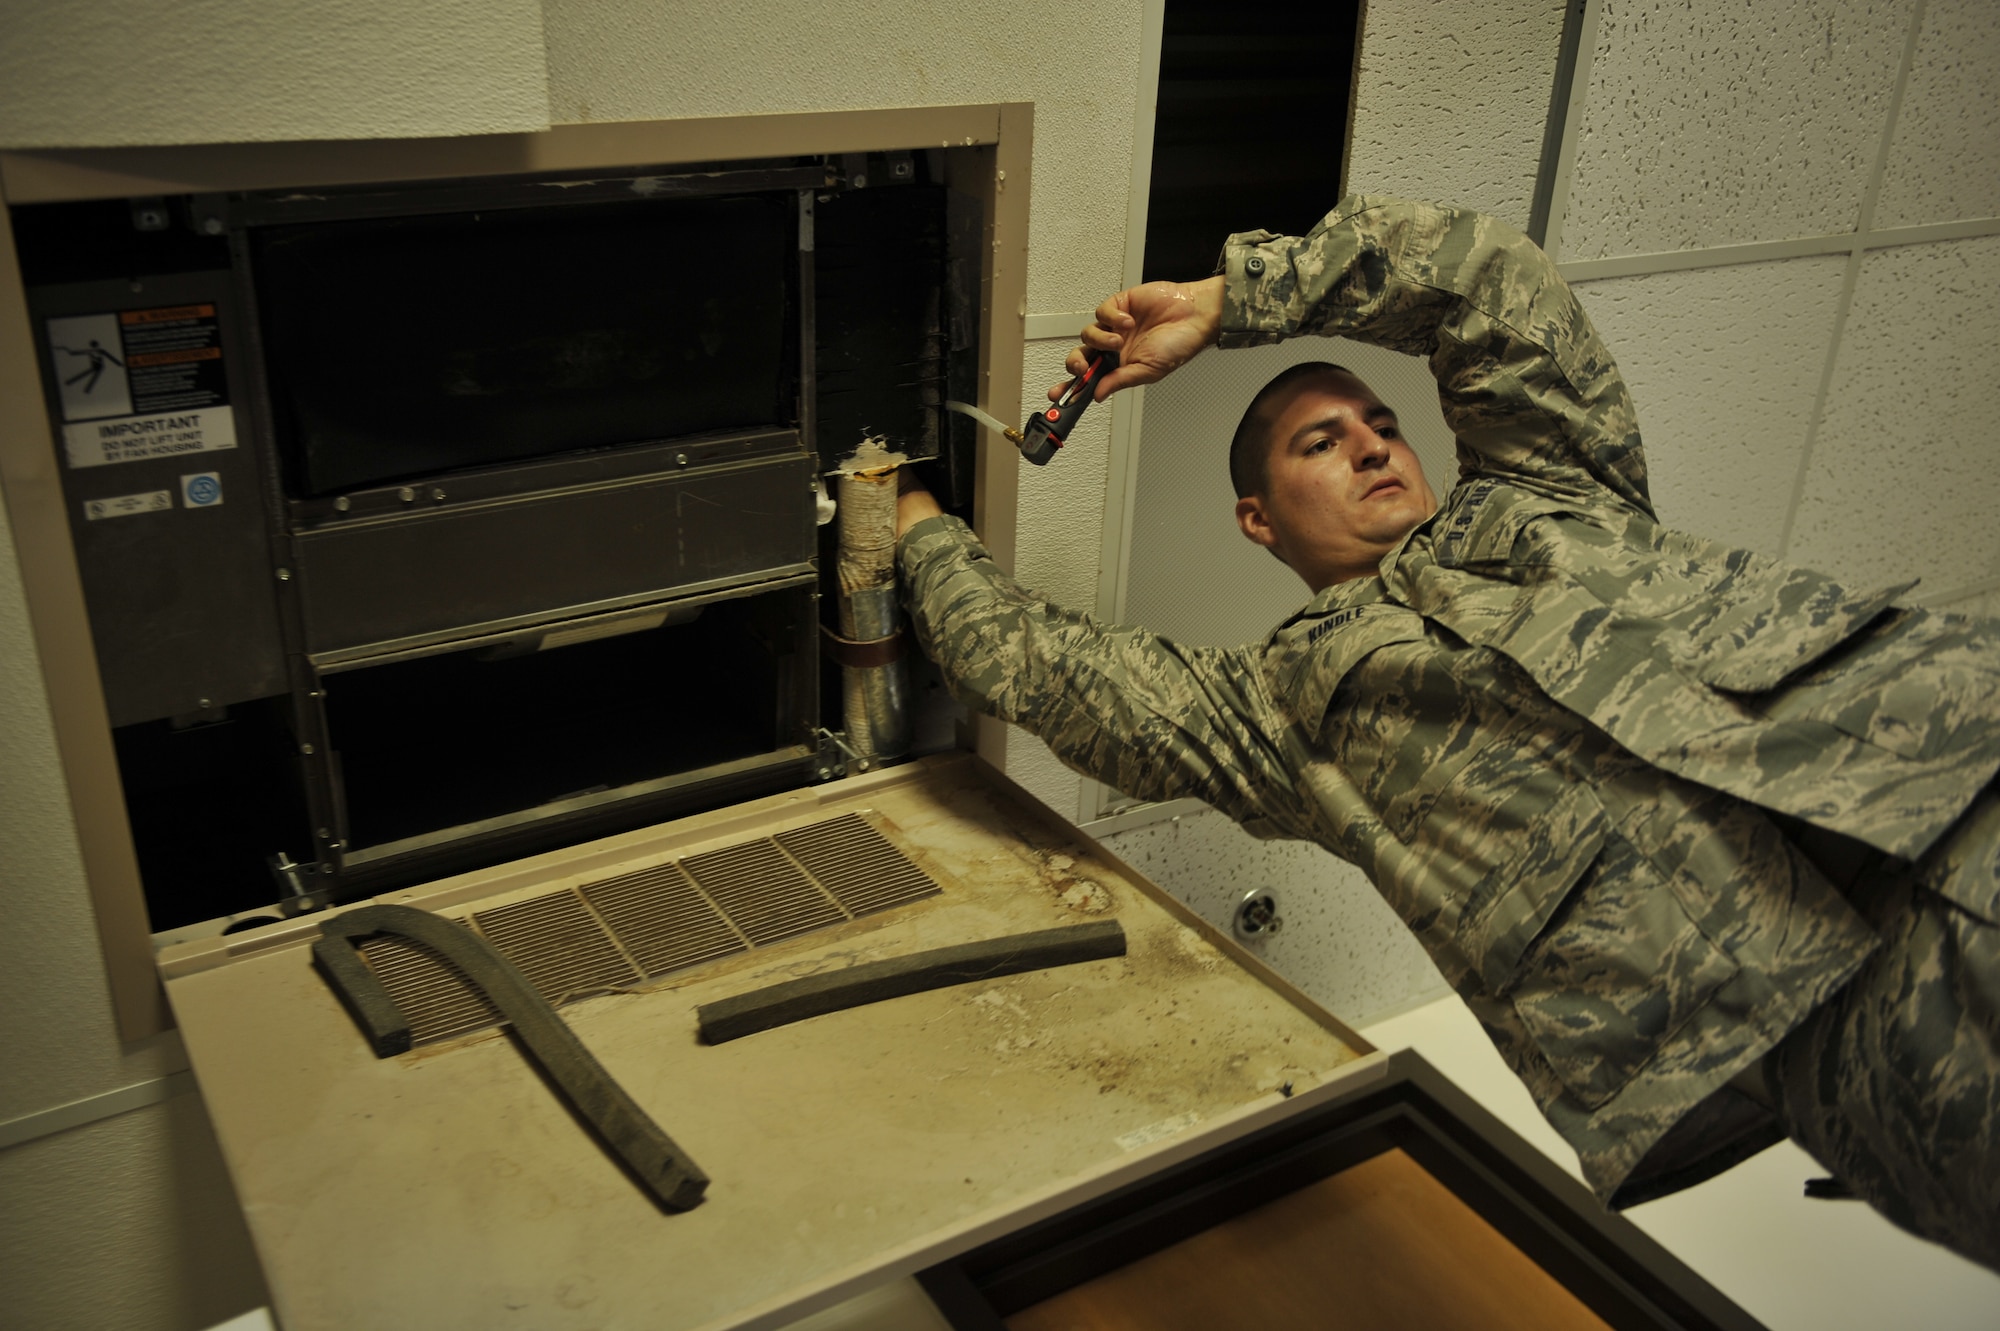 MOODY AIR FORCE BASE, Ga.-- Senior Airman Steven Kindle, 23rd Civil Engineer Squadron heating, ventilation, air conditioning and refrigeration journeyman, cleans out a drain line in a dormitory room here July 7.  The drain line requires cleaning because air condition units leak due to sludge build up. (U.S. Air Force photo by Staff Sgt. Schelli Jones/RELEASED)